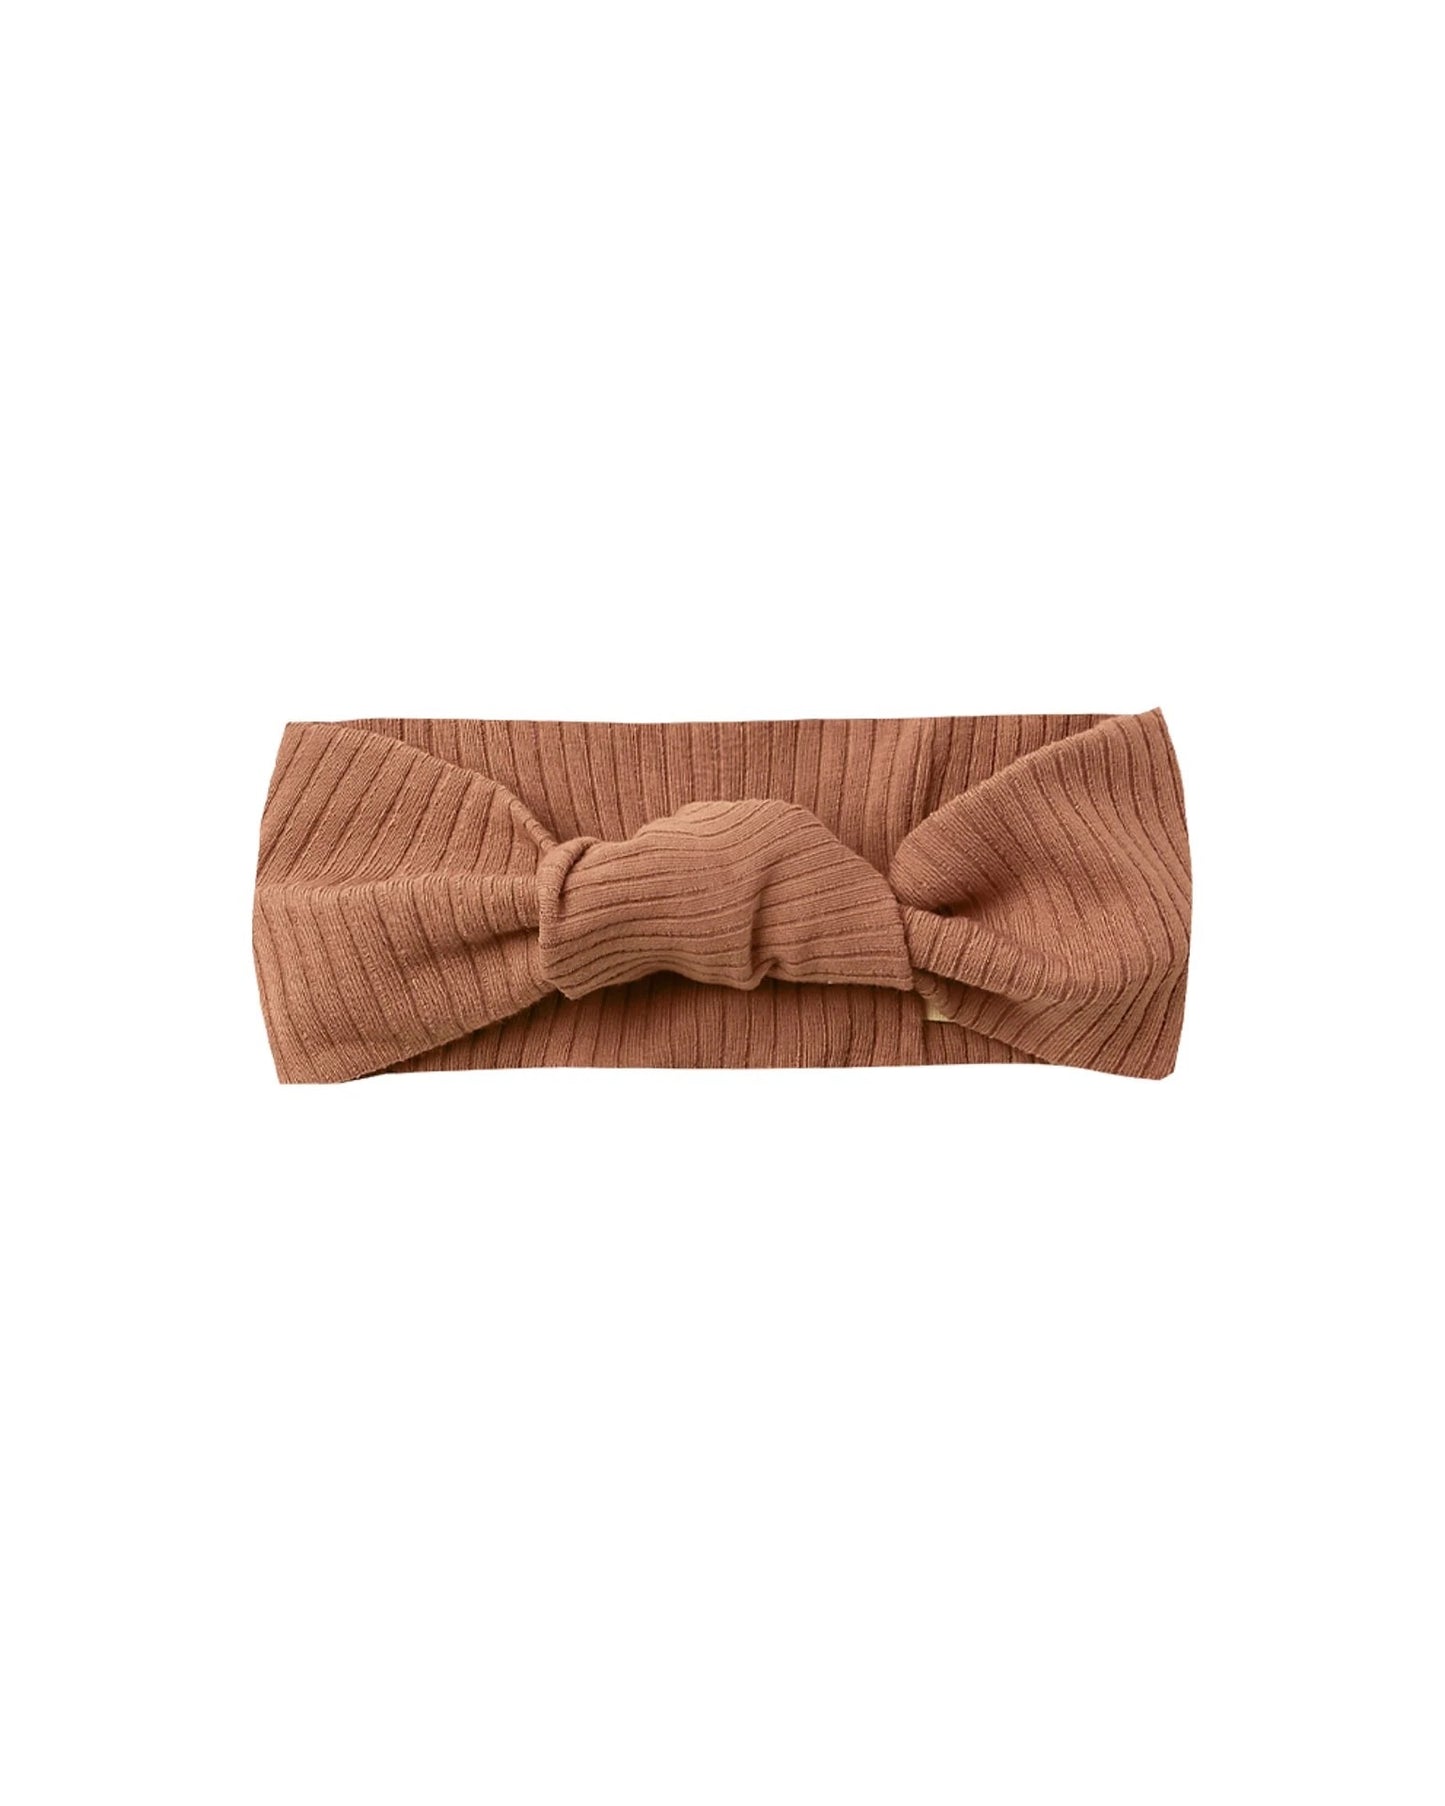 SALE - Quincy Mae Ribbed Baby Knotted Headband Turban - Multiple Colors Available